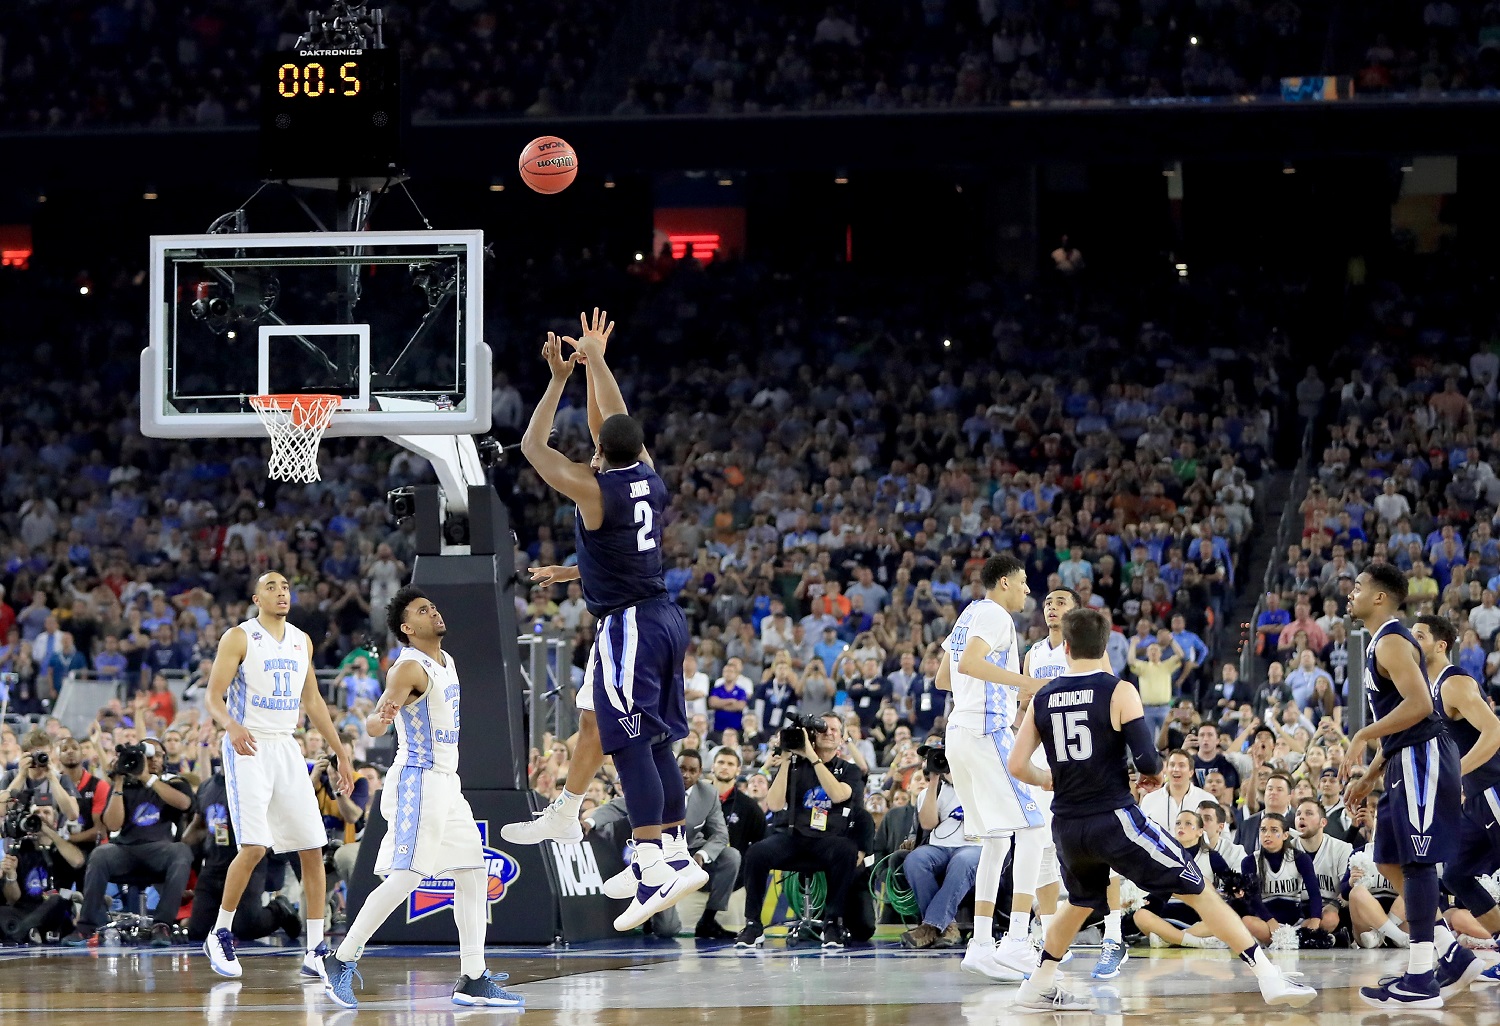 Kris Jenkins of Villanova won the 2016 NCAA Tournament title game with a 3-pointer against North Carolina as time expired.